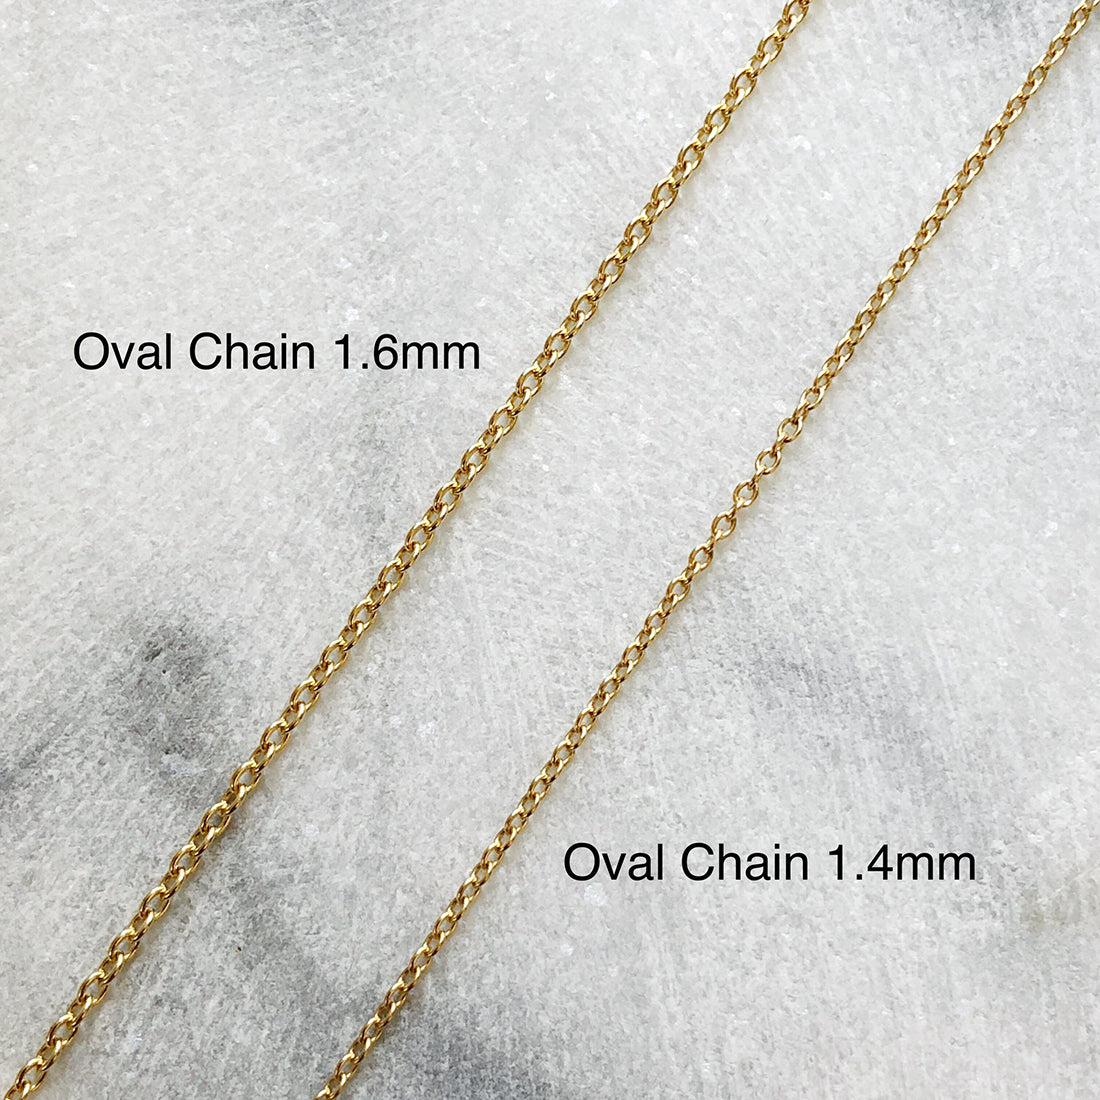 18K　Oval Chain　オーバルチェーン　　Necklace　ネックレス　1.4mm　太さ比較